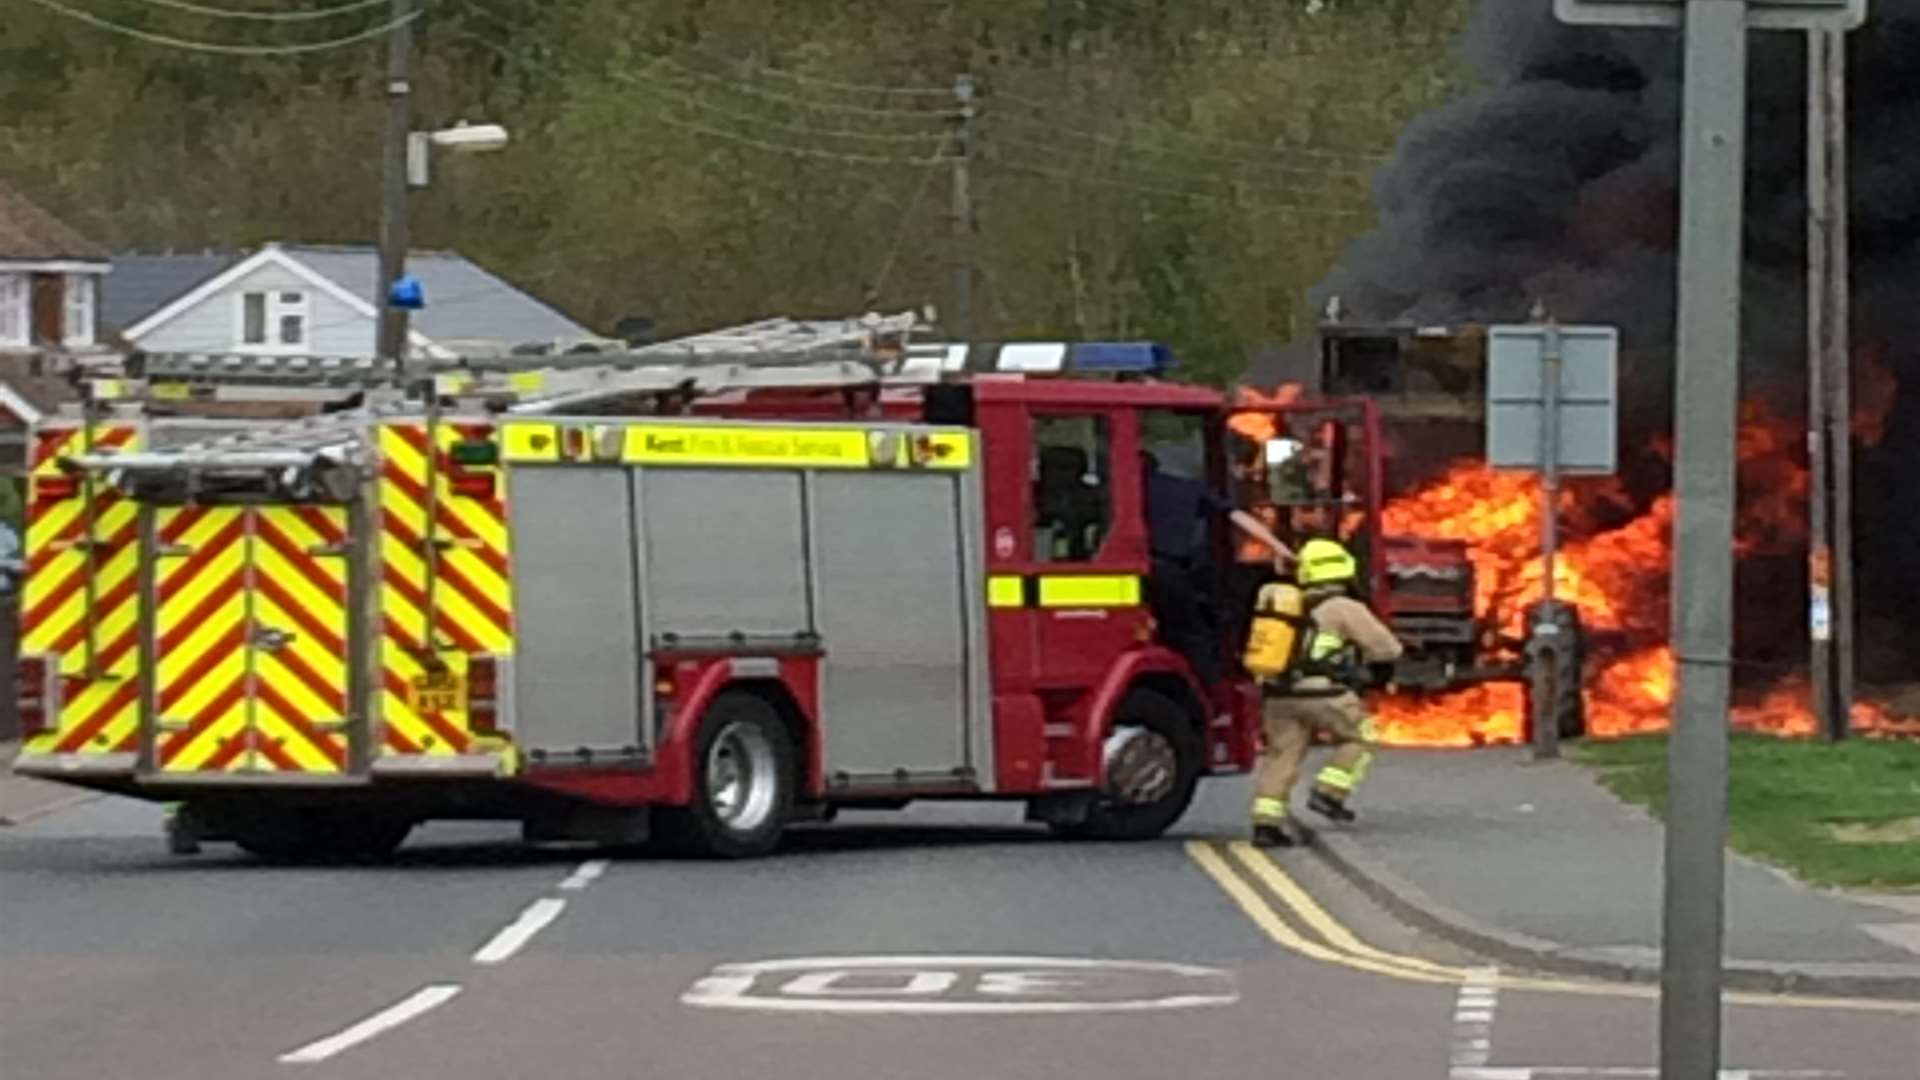 Firefighters tackling the blaze in Town Road, Cliffe Woods. Pic: Jason Stafford